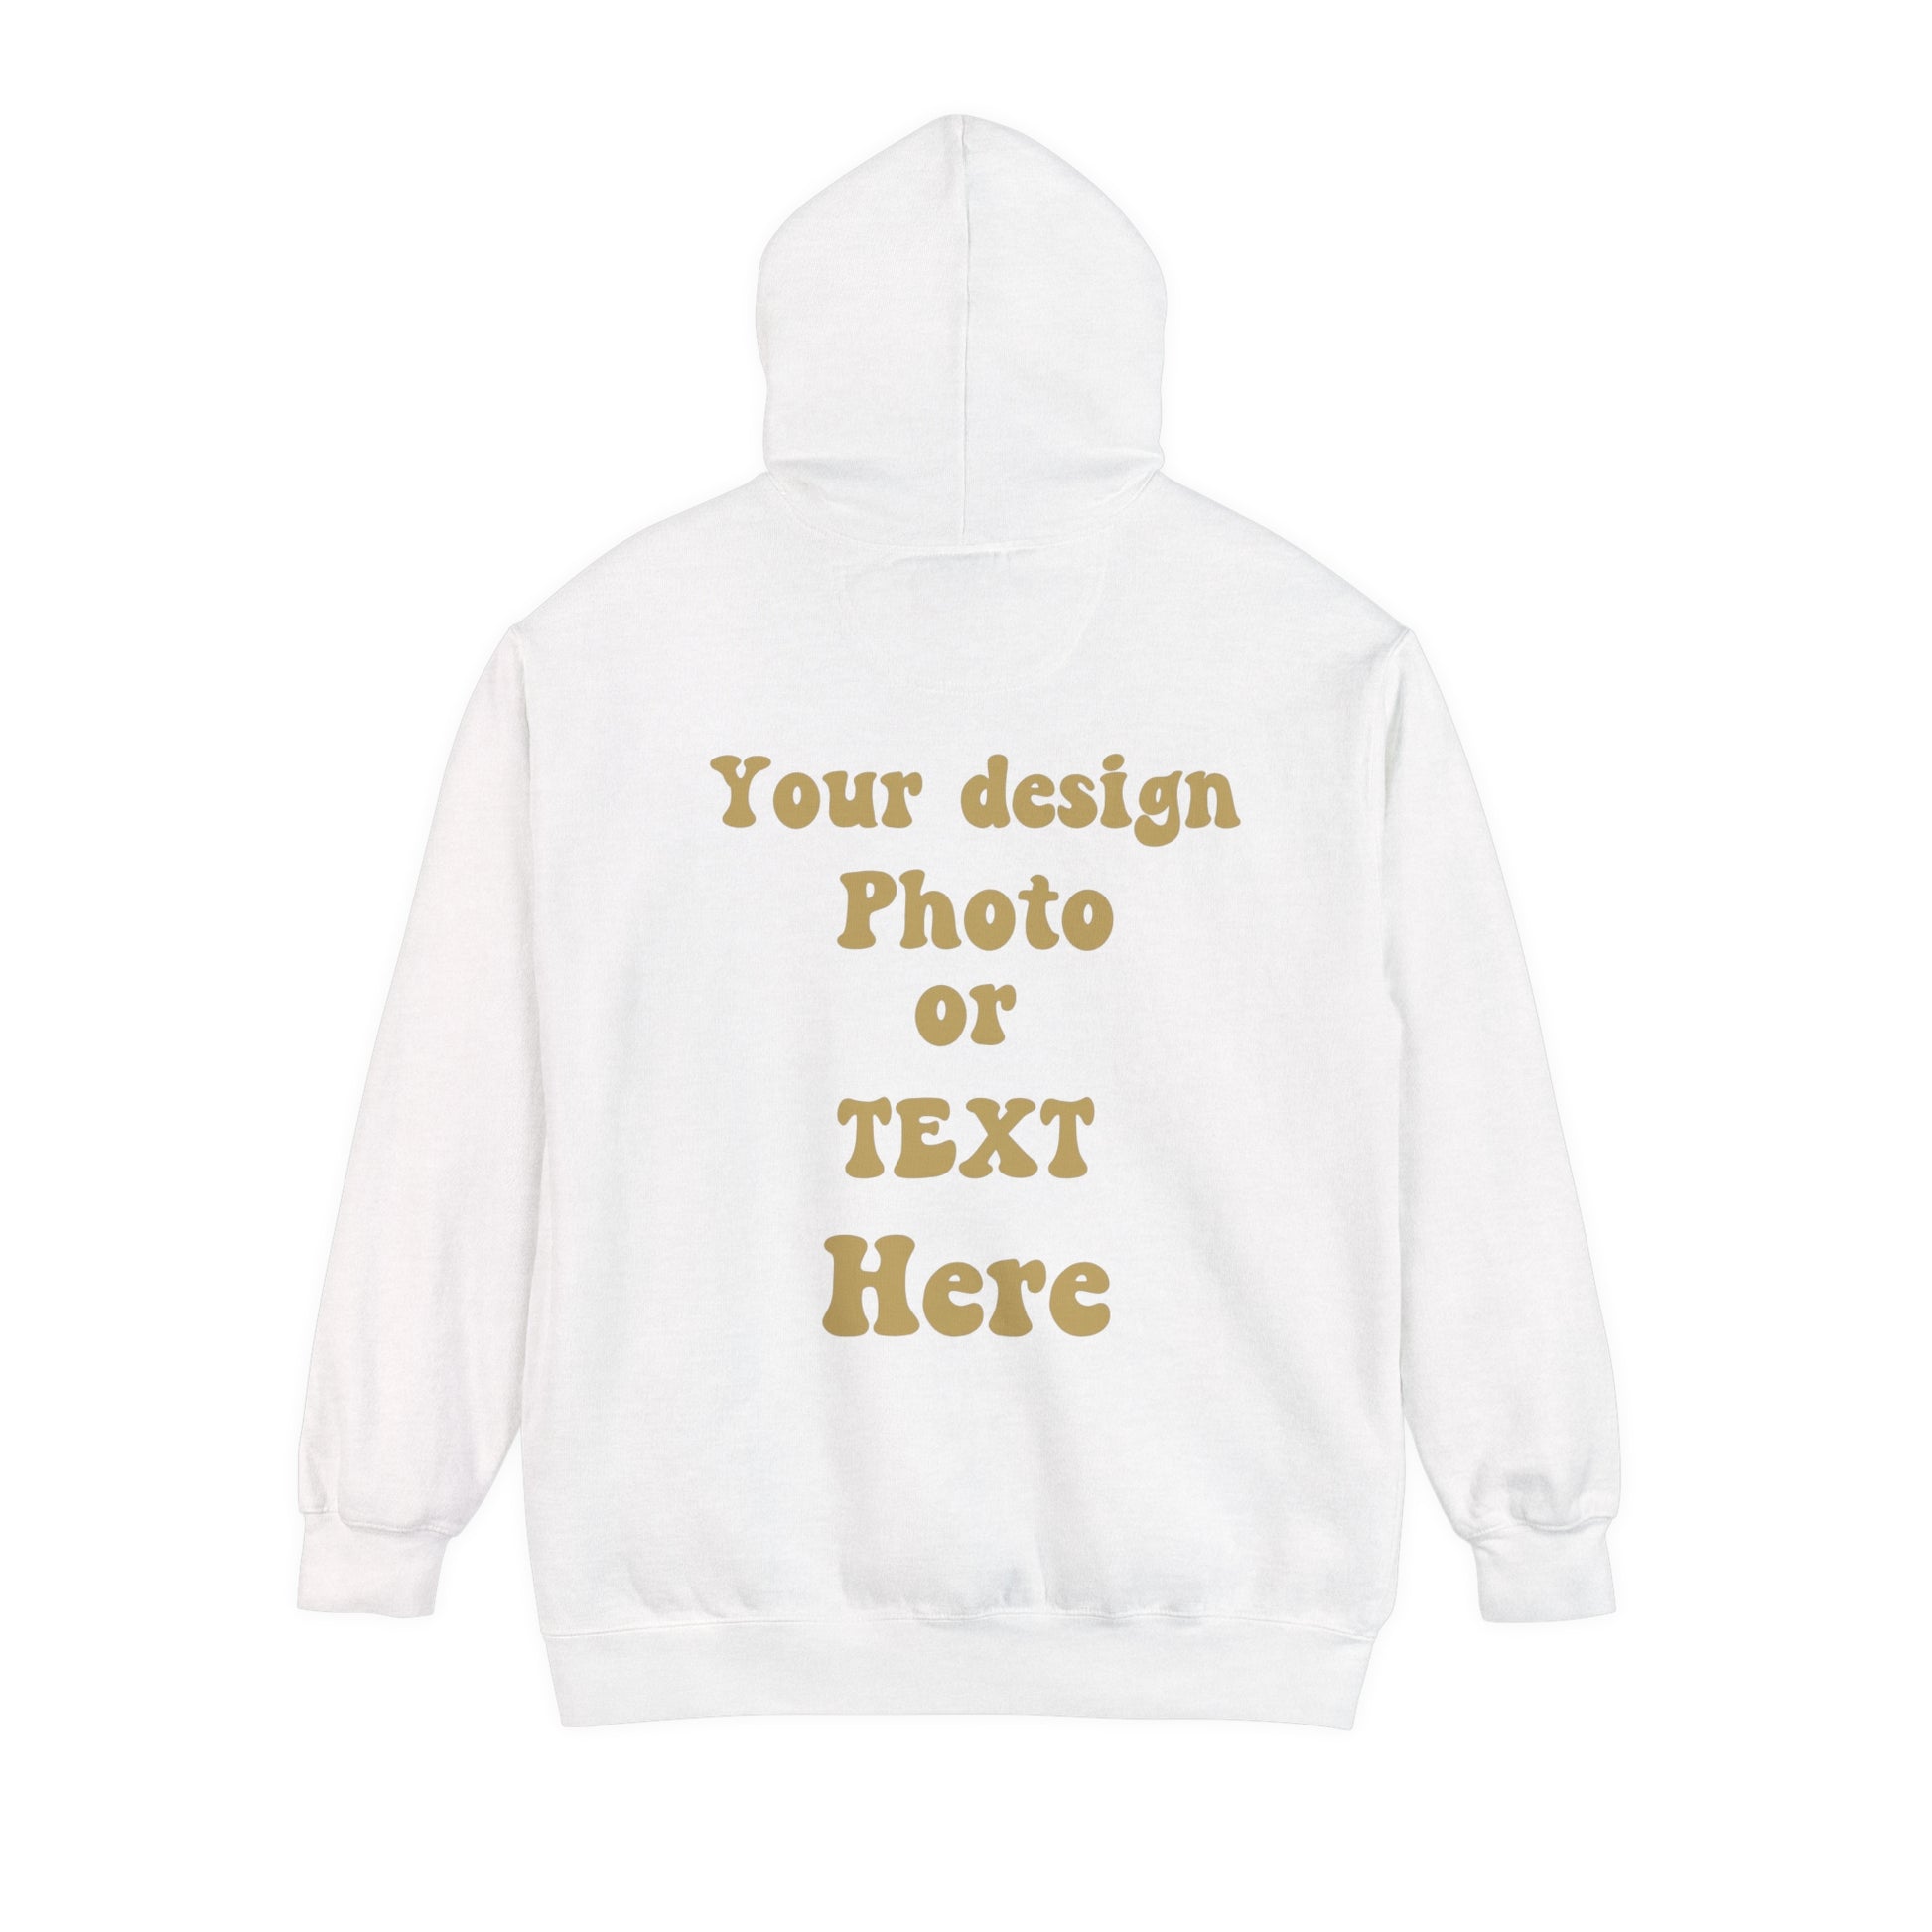 Luxury Hoodie - Personalize with Your Design, Photo, or Text | Greatest Comfort Hoodie   